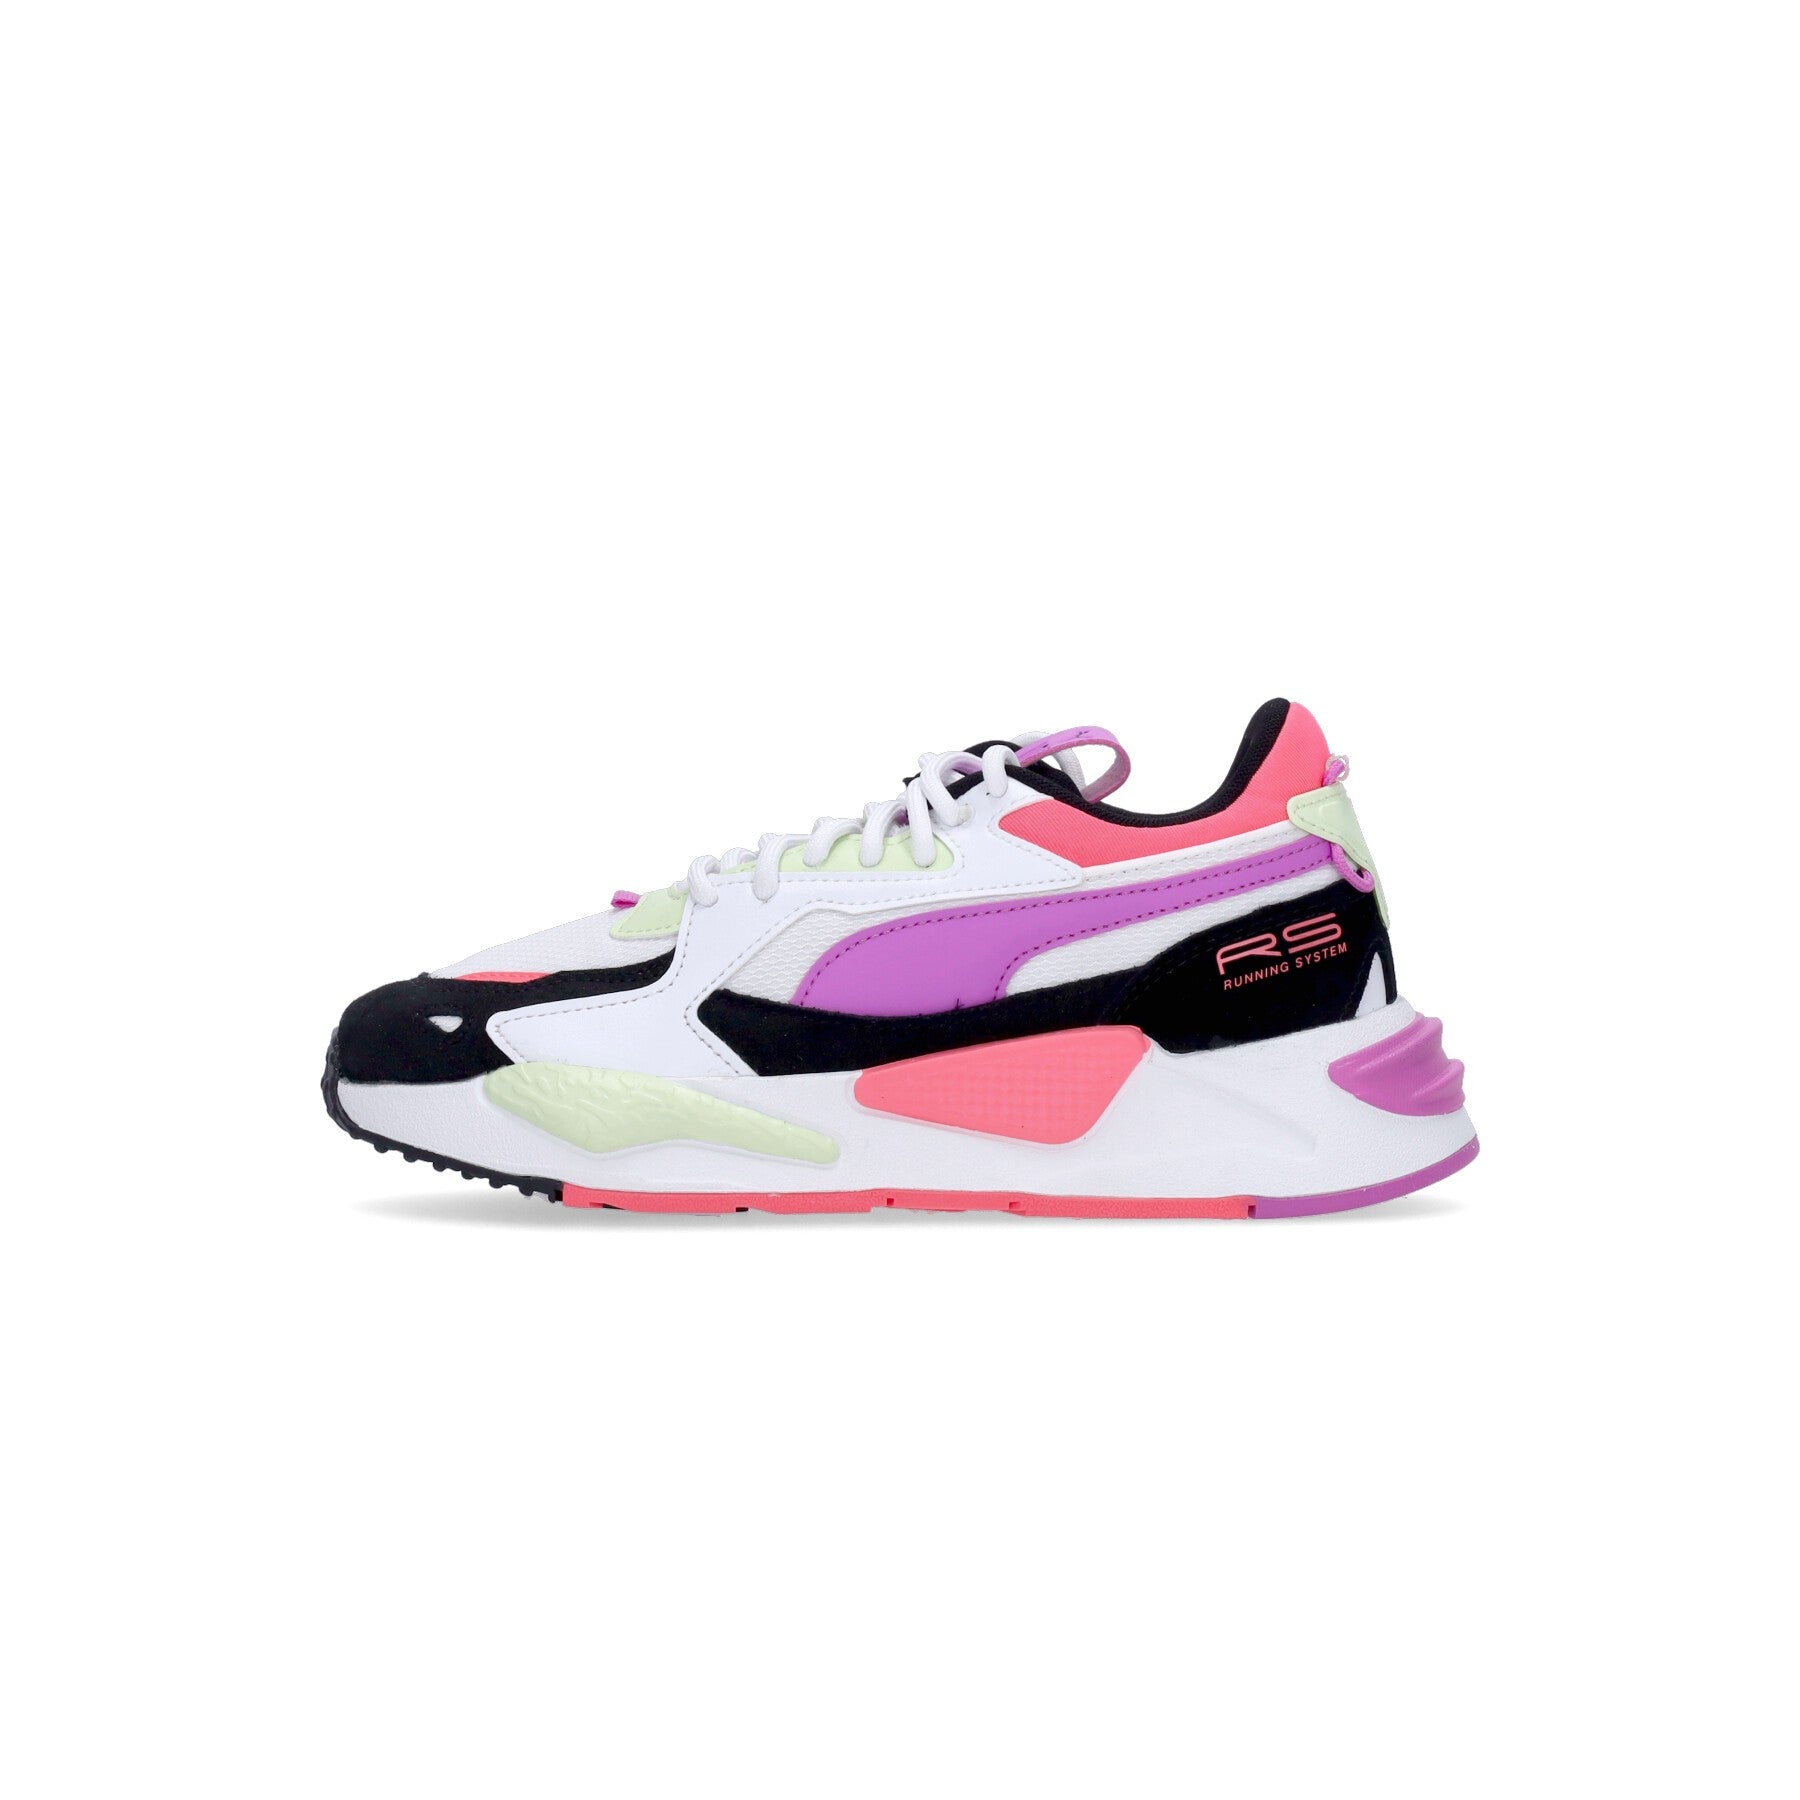 Rs-z Reinvent Wns White/sunset Glow Women's Low Shoe